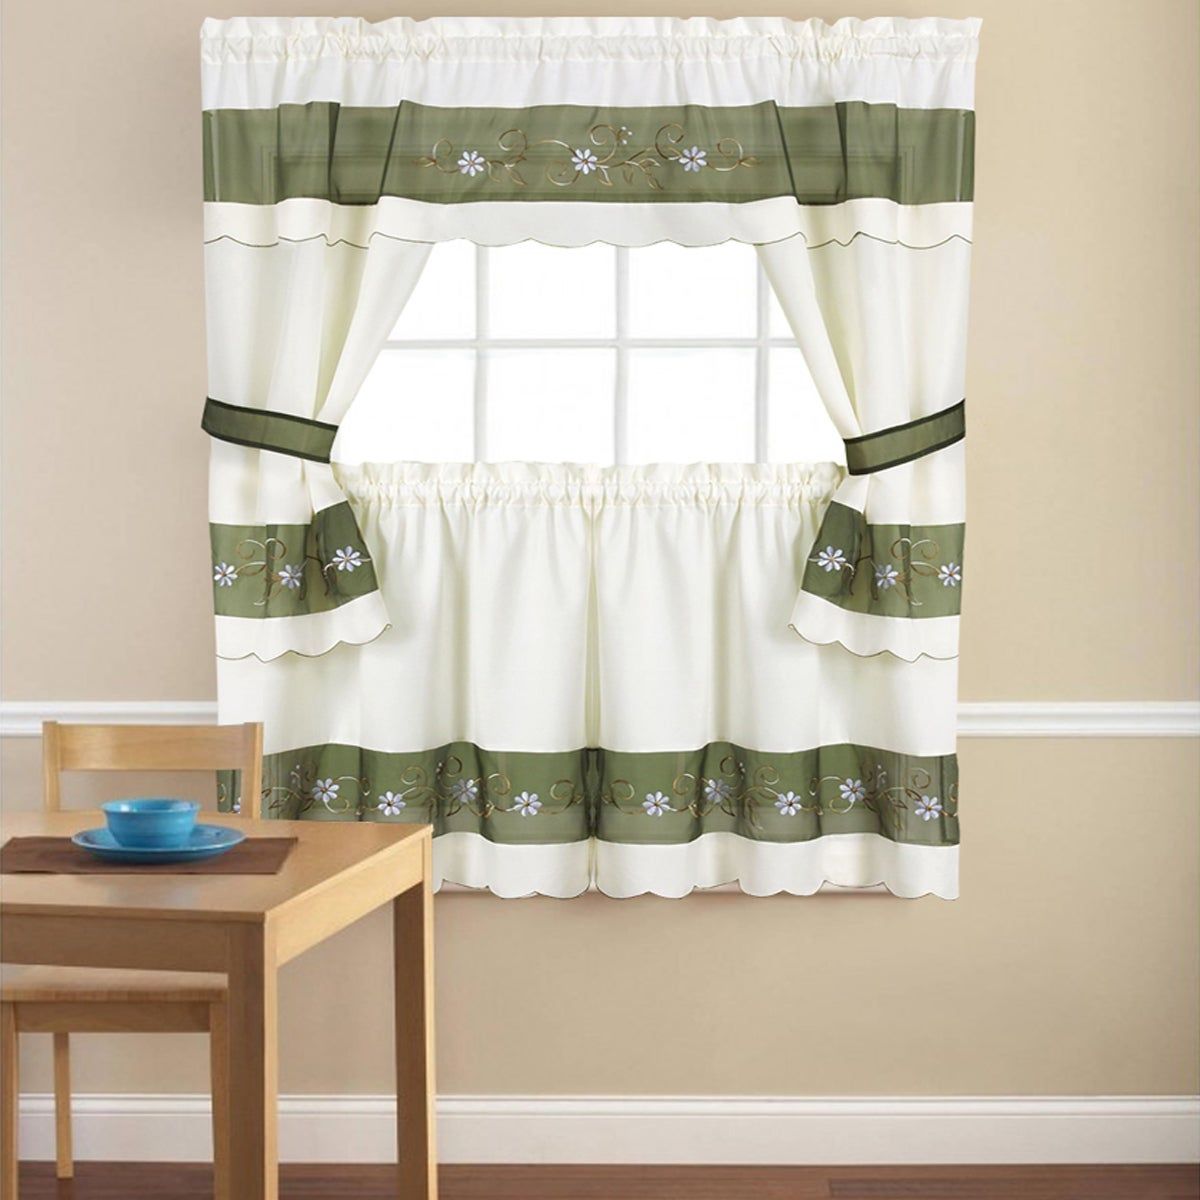 Embroidered Floral 5 Piece Kitchen Curtain Set Throughout Urban Embroidered Tier And Valance Kitchen Curtain Tier Sets (View 12 of 20)